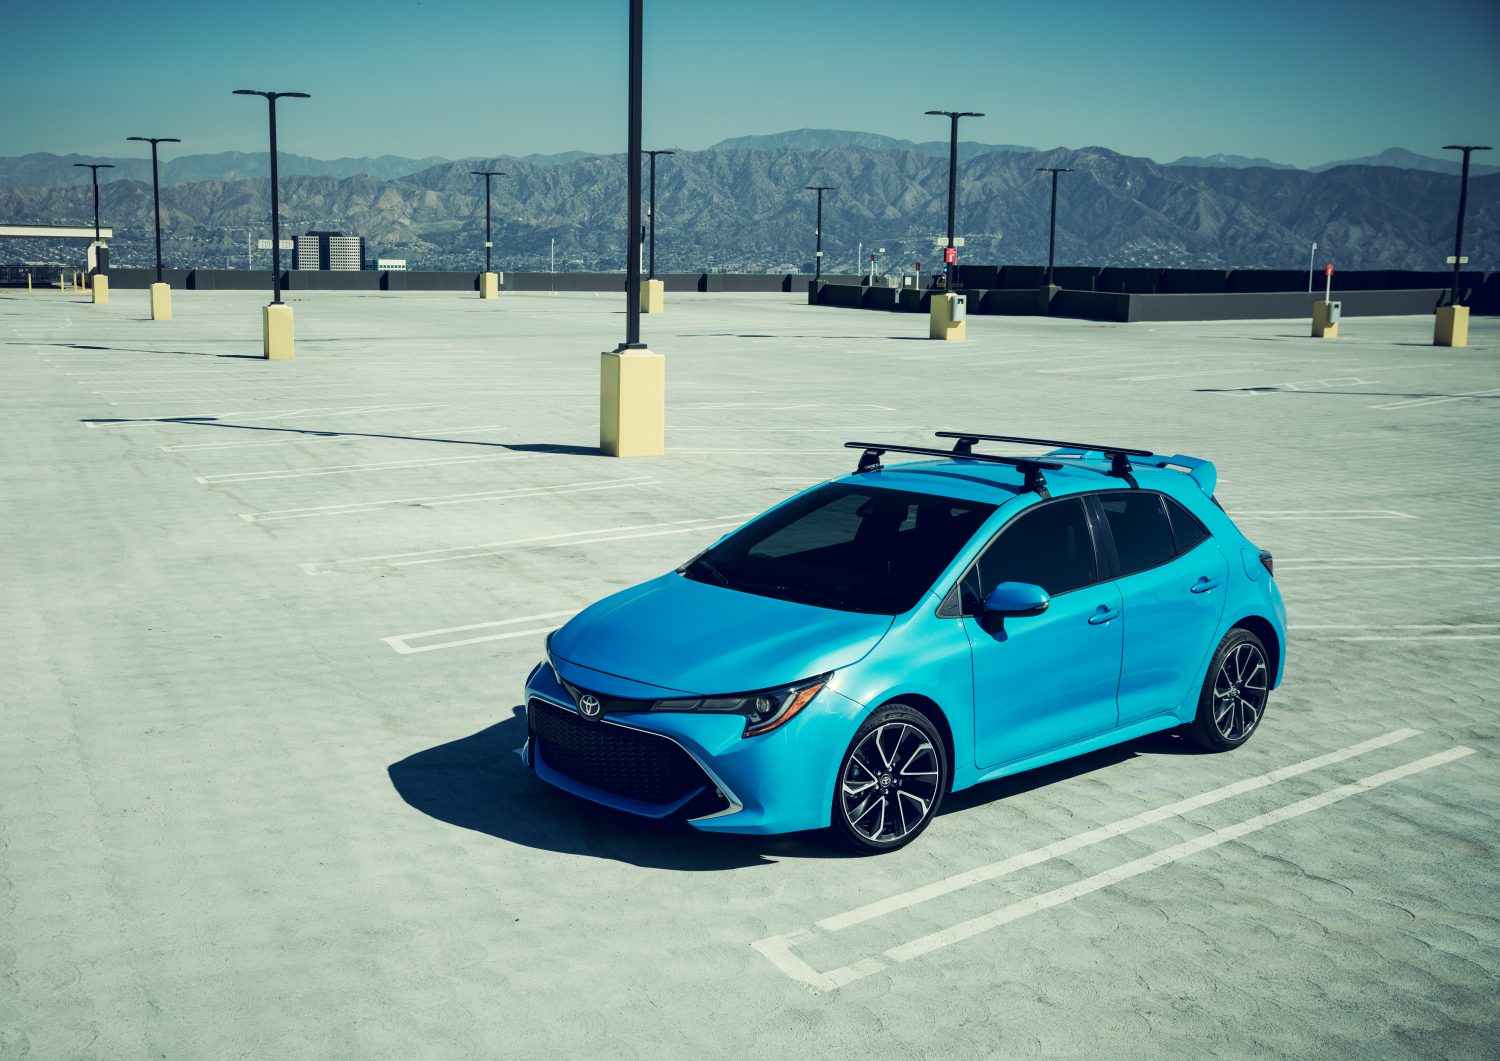 Hatch is Back! All-New 2019 Toyota Corolla Hatchback Wows at the 2018 New  York International Auto Show - Toyota USA Newsroom